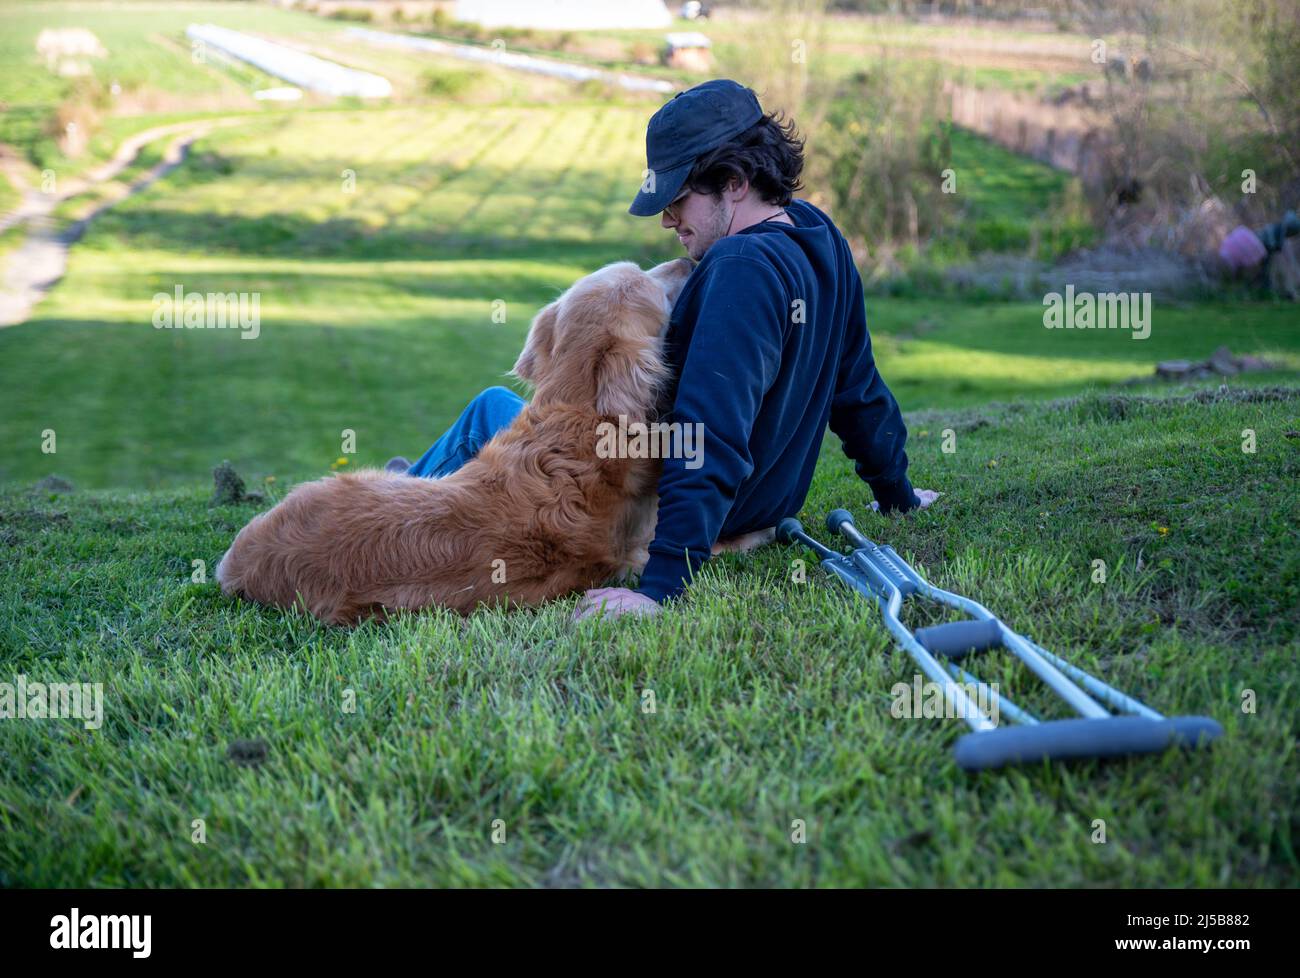 Crutches in the foreground of this idyllic rural farm background scene with a young man and his loving golden retriever dog cuddling with an arm aroun Stock Photo